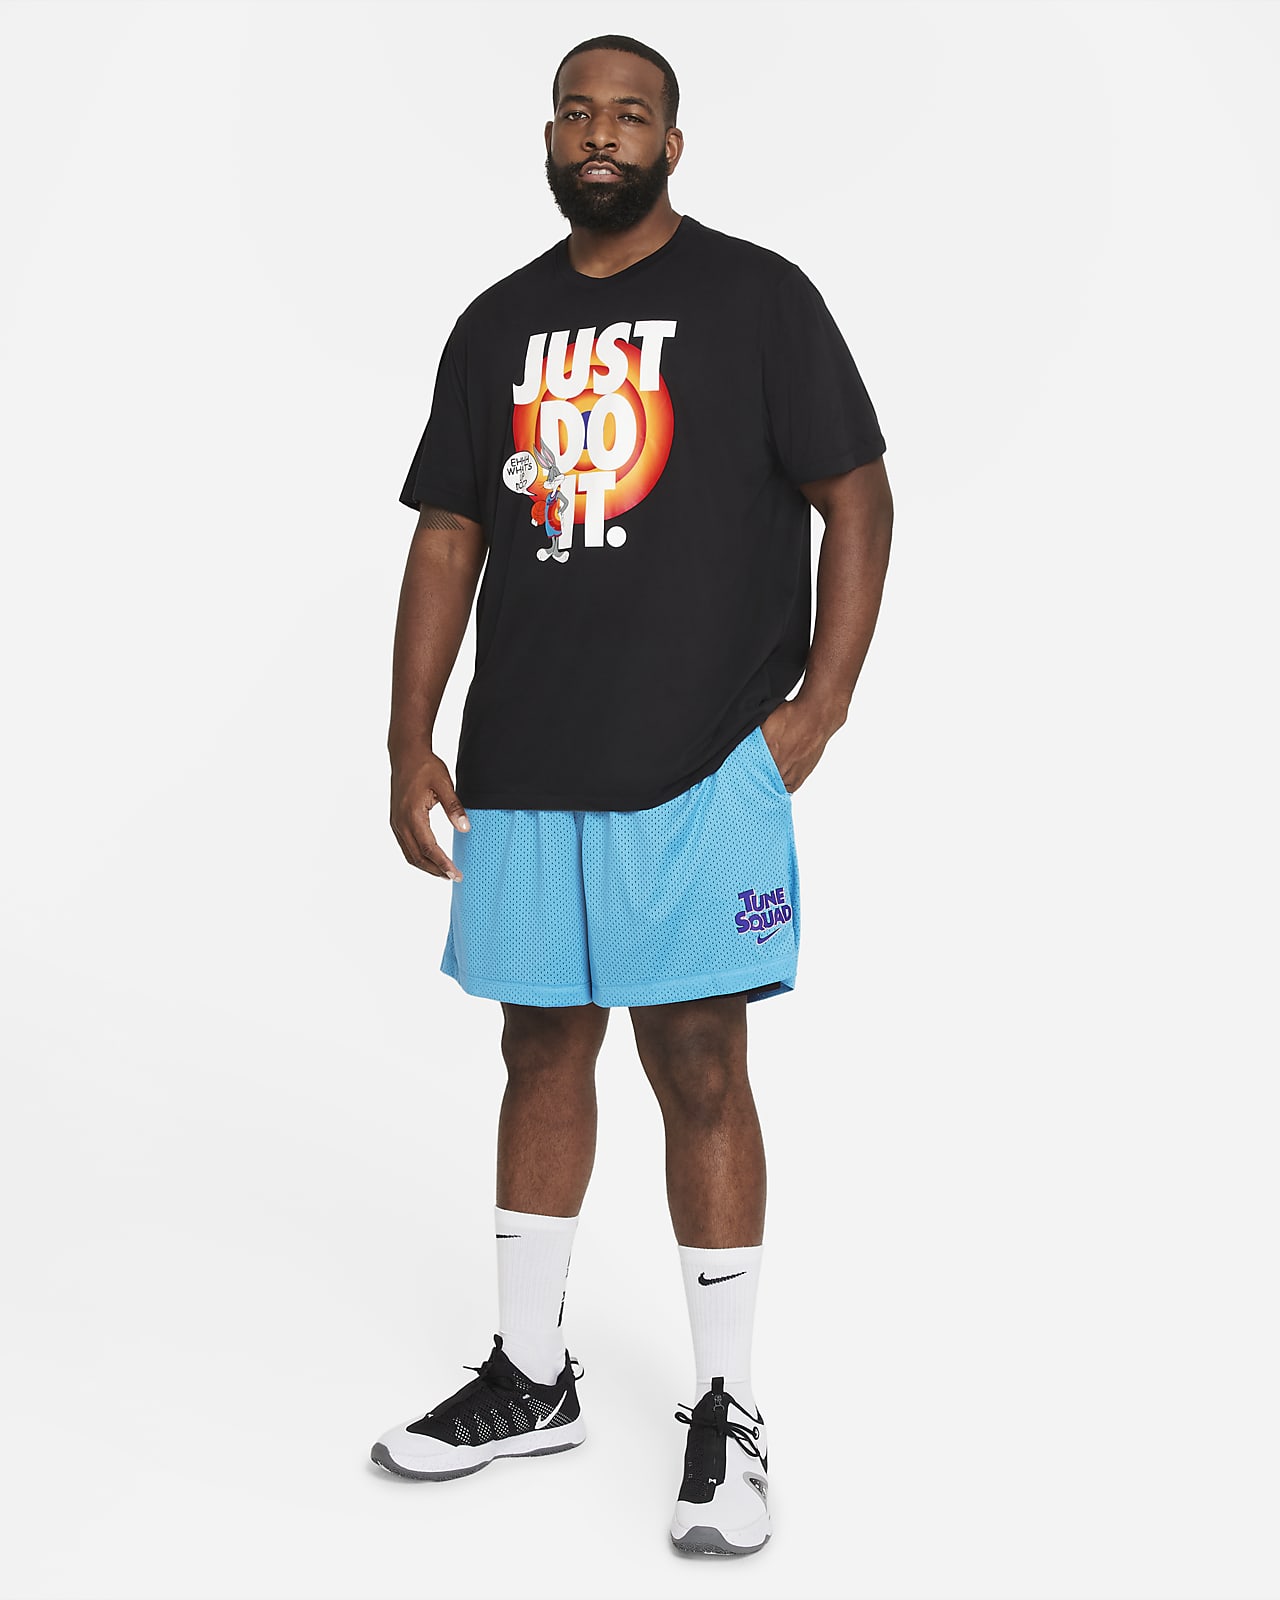 Nike Dri-FIT Standard Issue x Space Jam: A New Legacy Men's Basketball ...